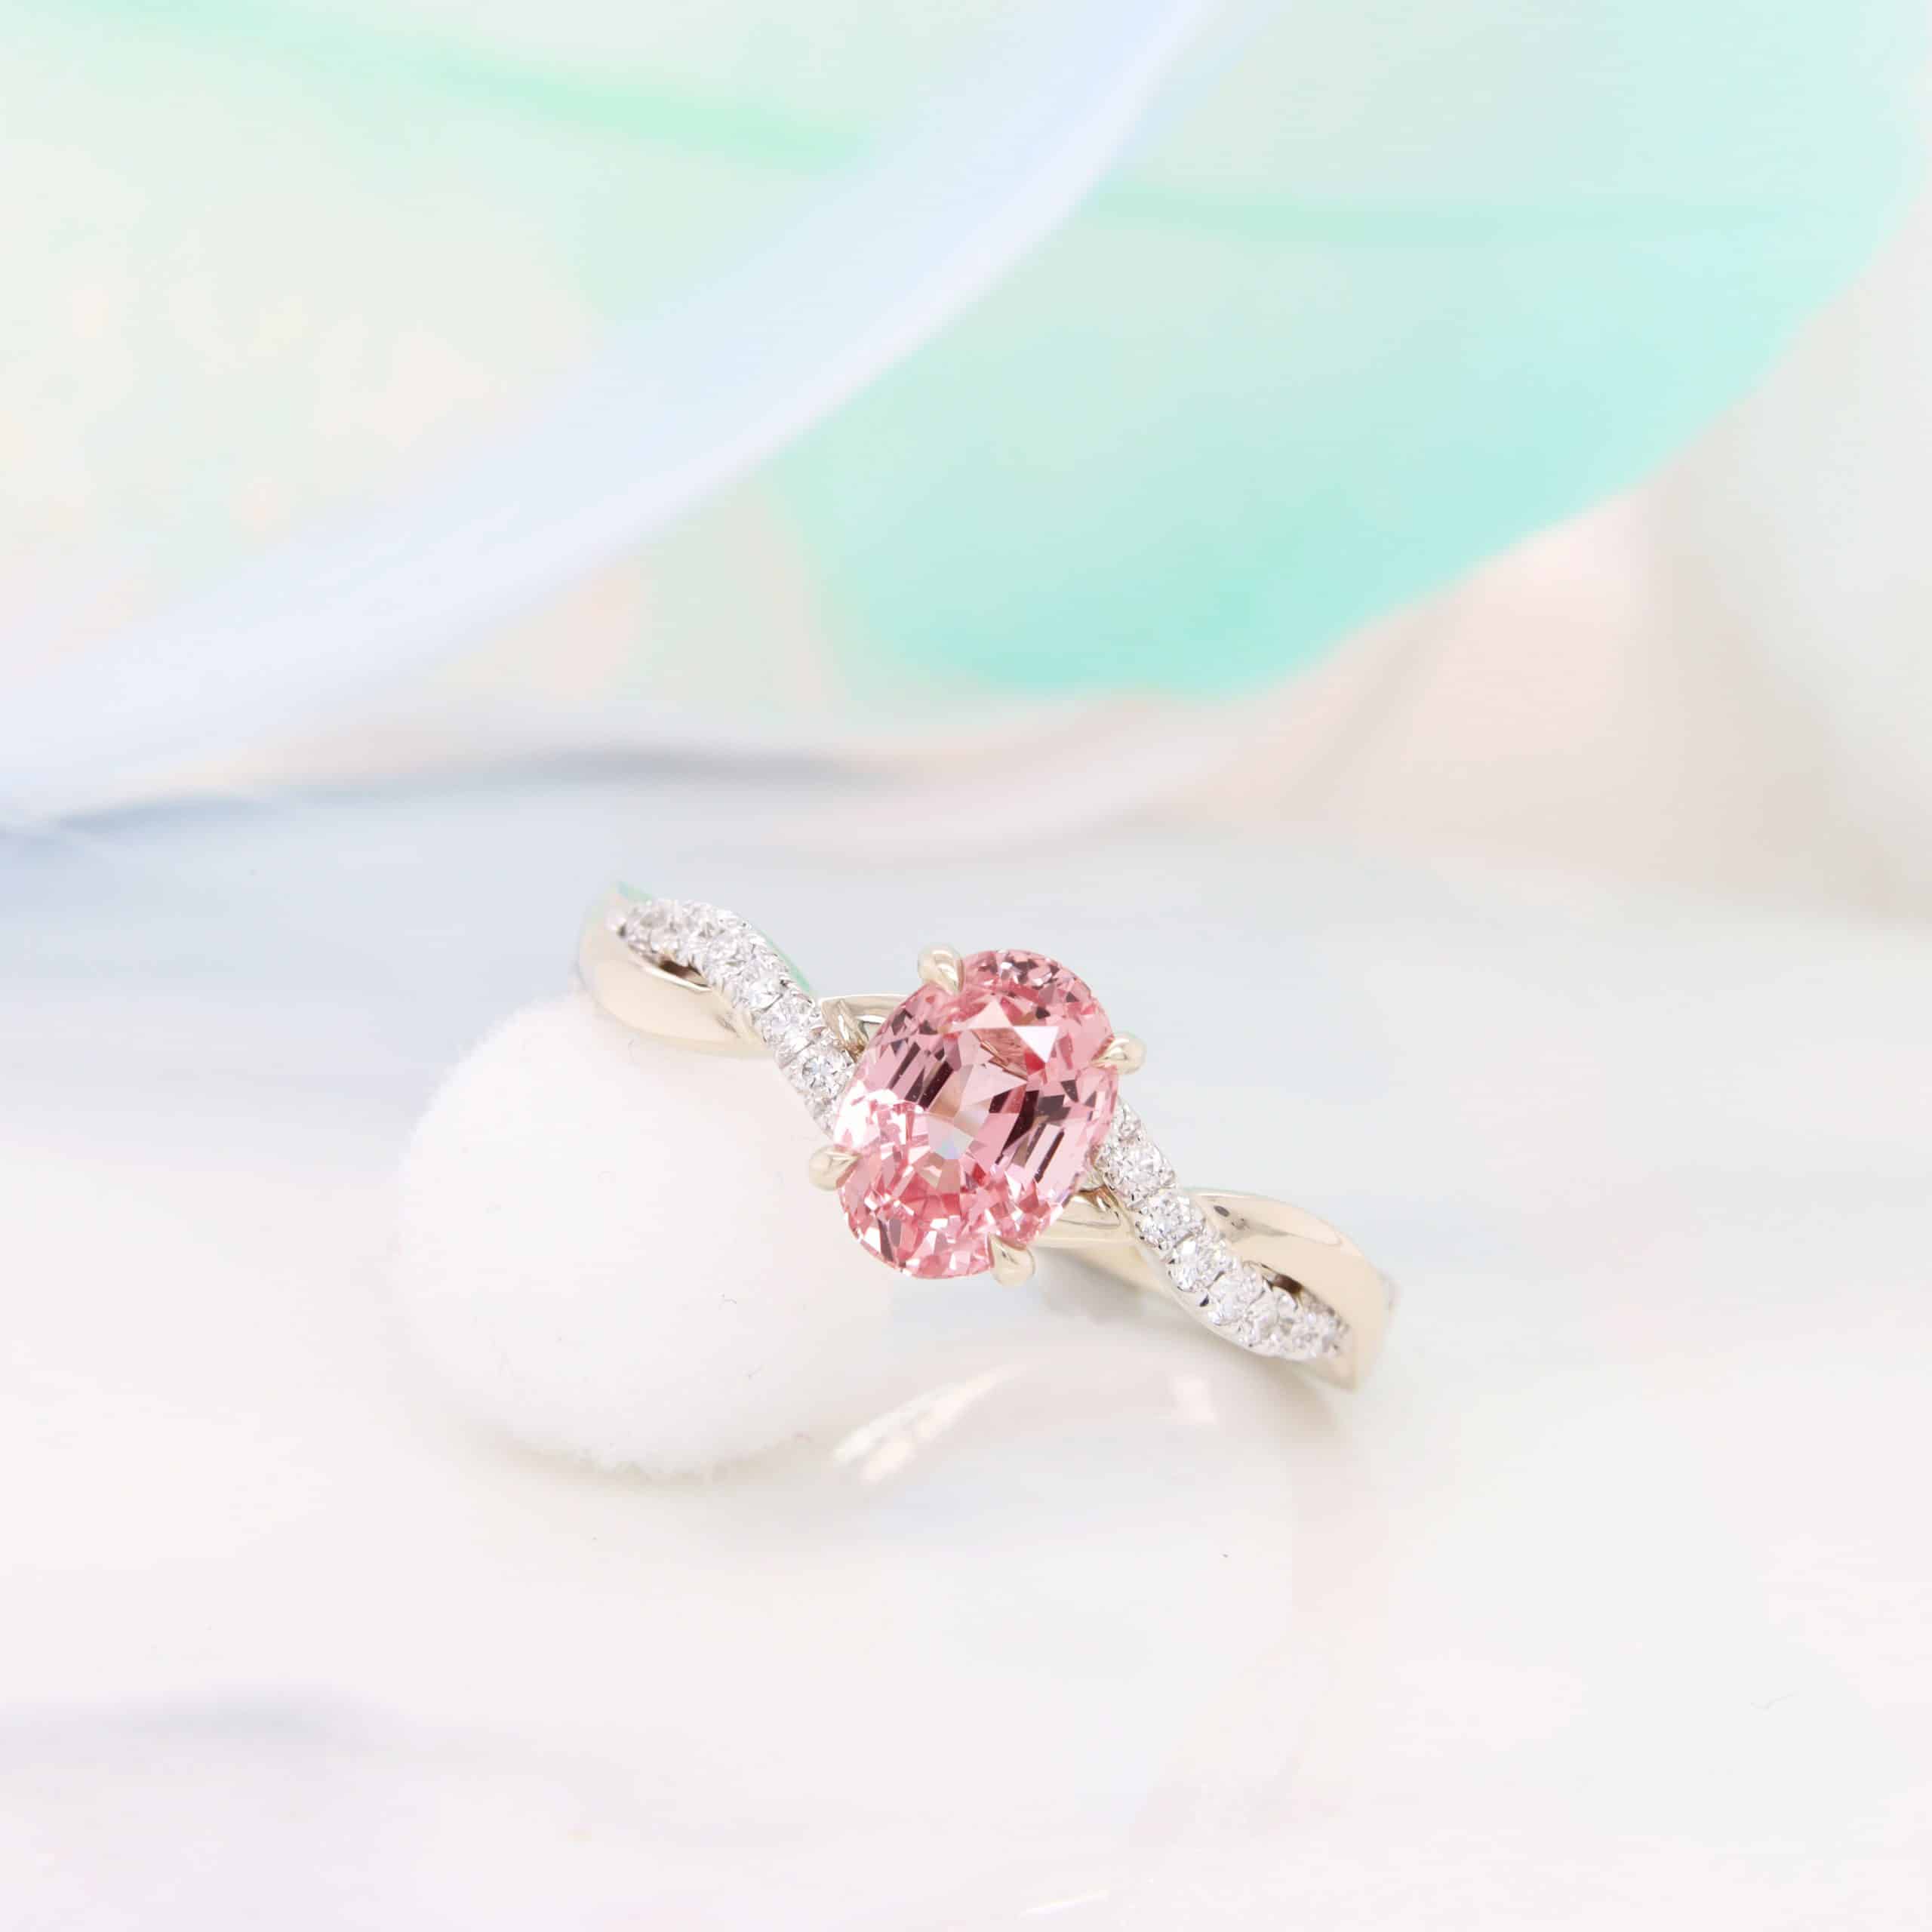 Sapphire Engagement Ring with padparadscha orangy-pink sapphire gemstone